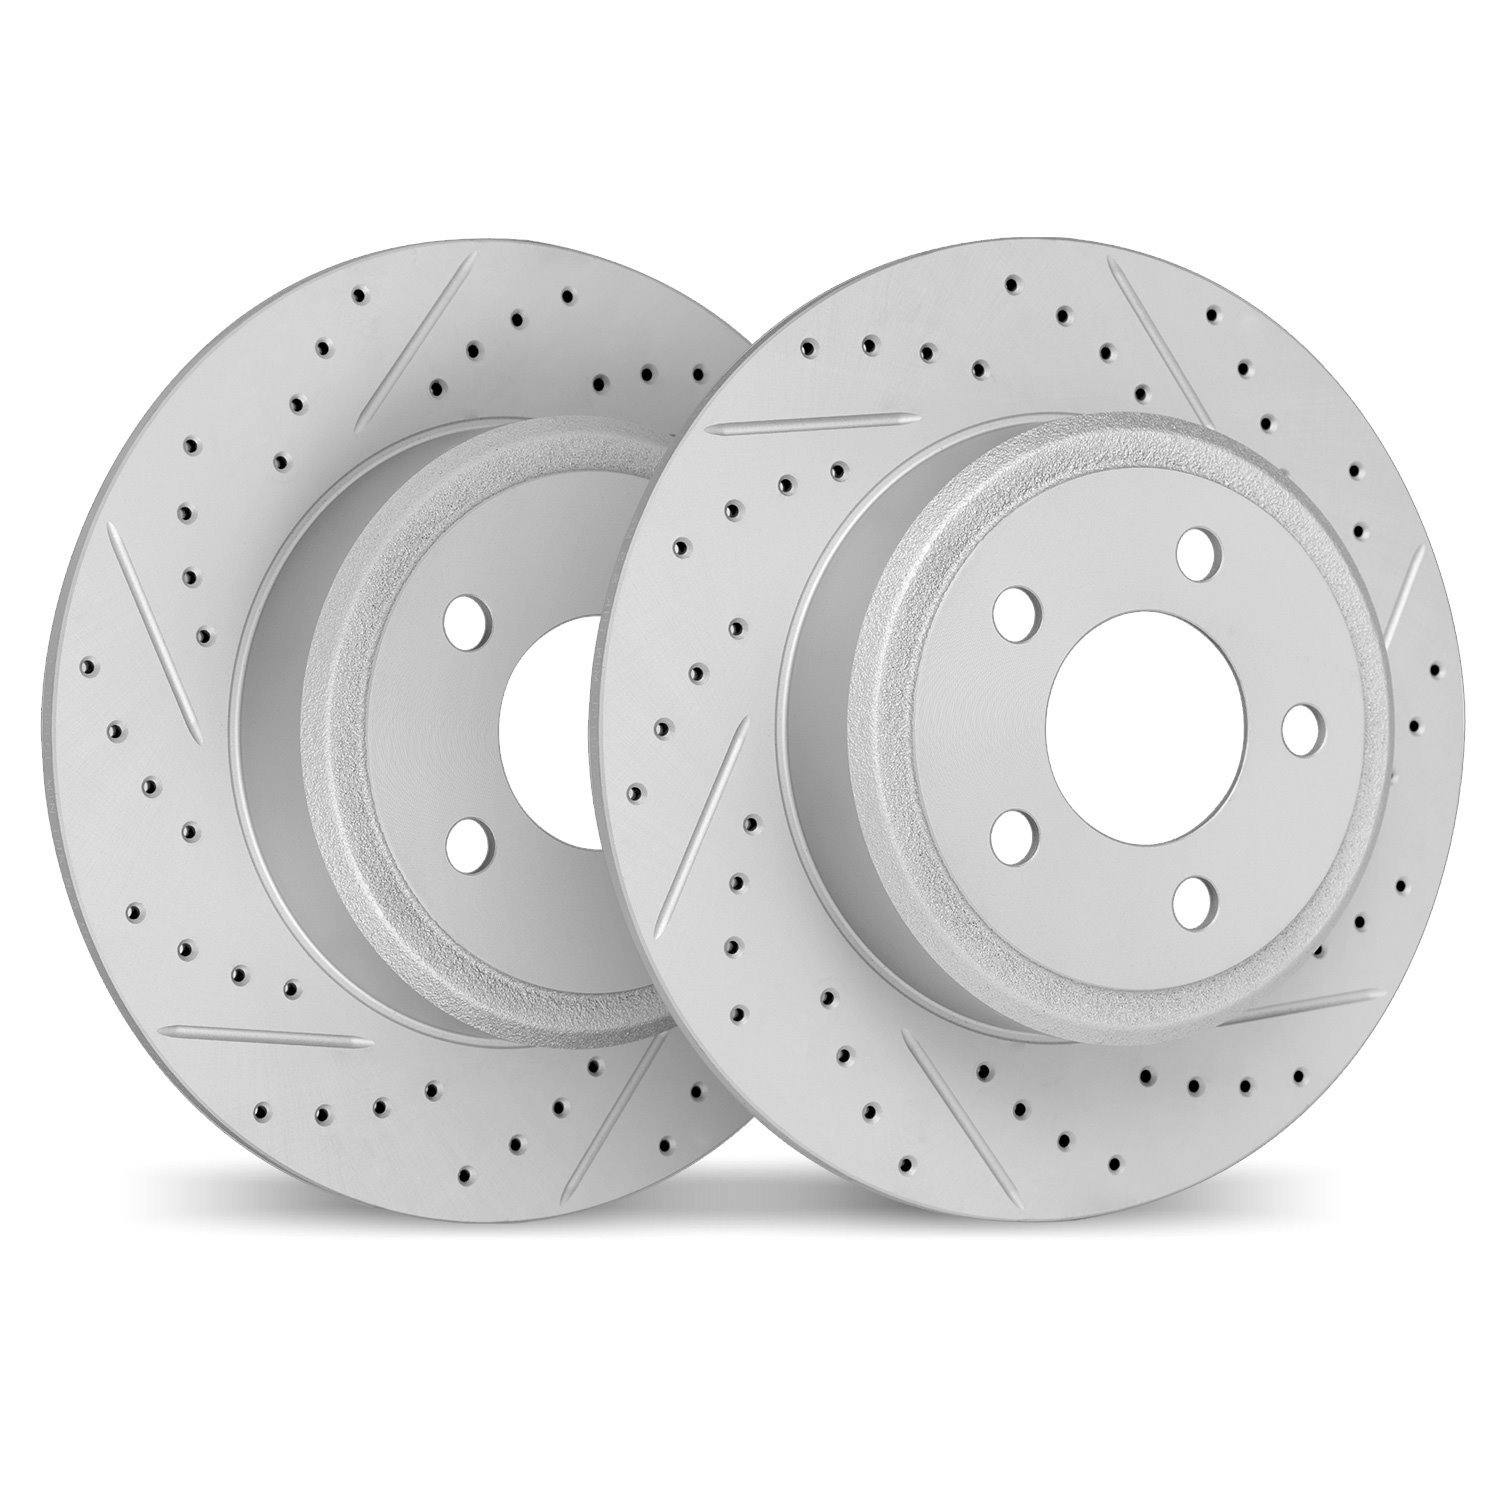 2002-76059 Geoperformance Drilled/Slotted Brake Rotors, Fits Select Lexus/Toyota/Scion, Position: Rear